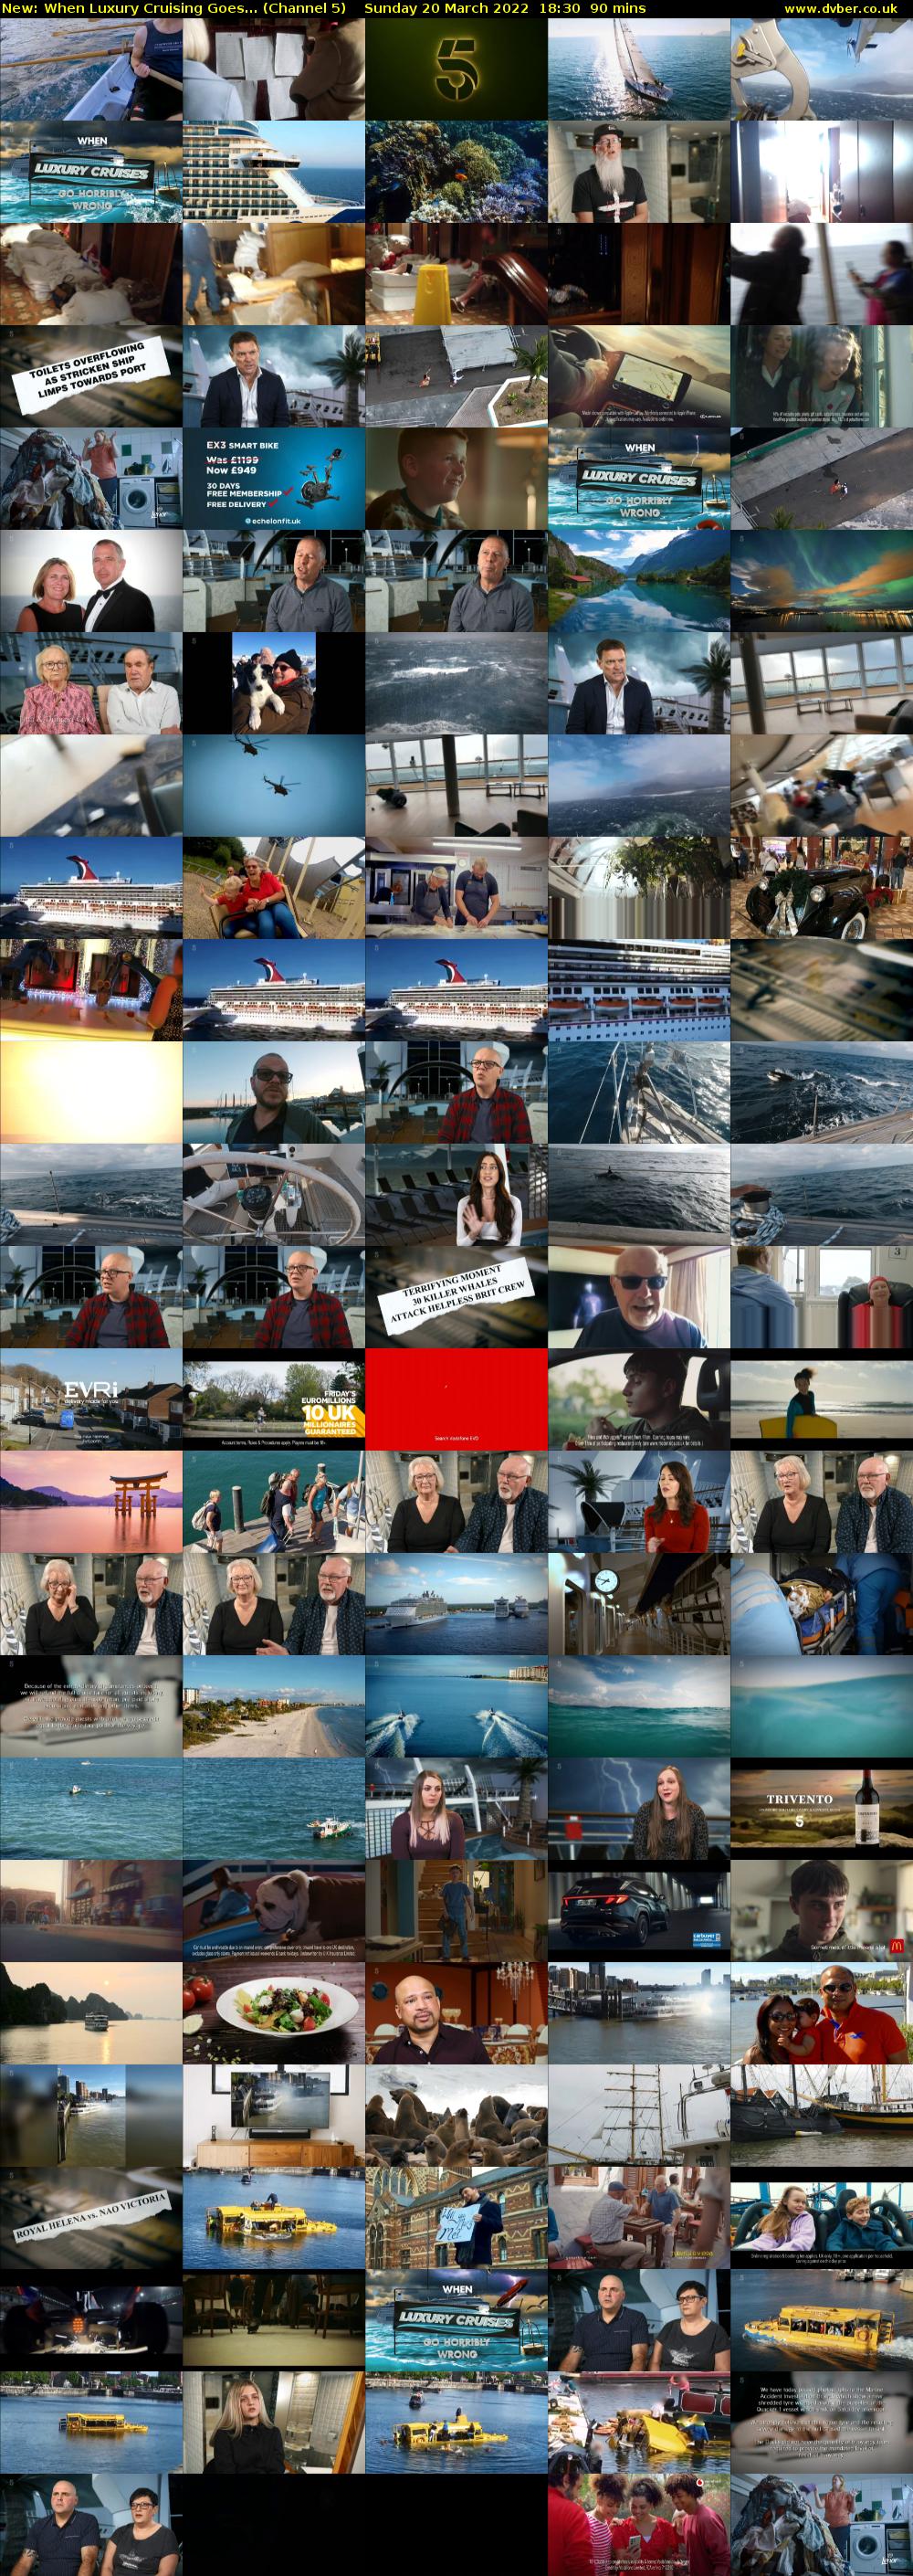 When Luxury Cruising Goes... (Channel 5) Sunday 20 March 2022 18:30 - 20:00